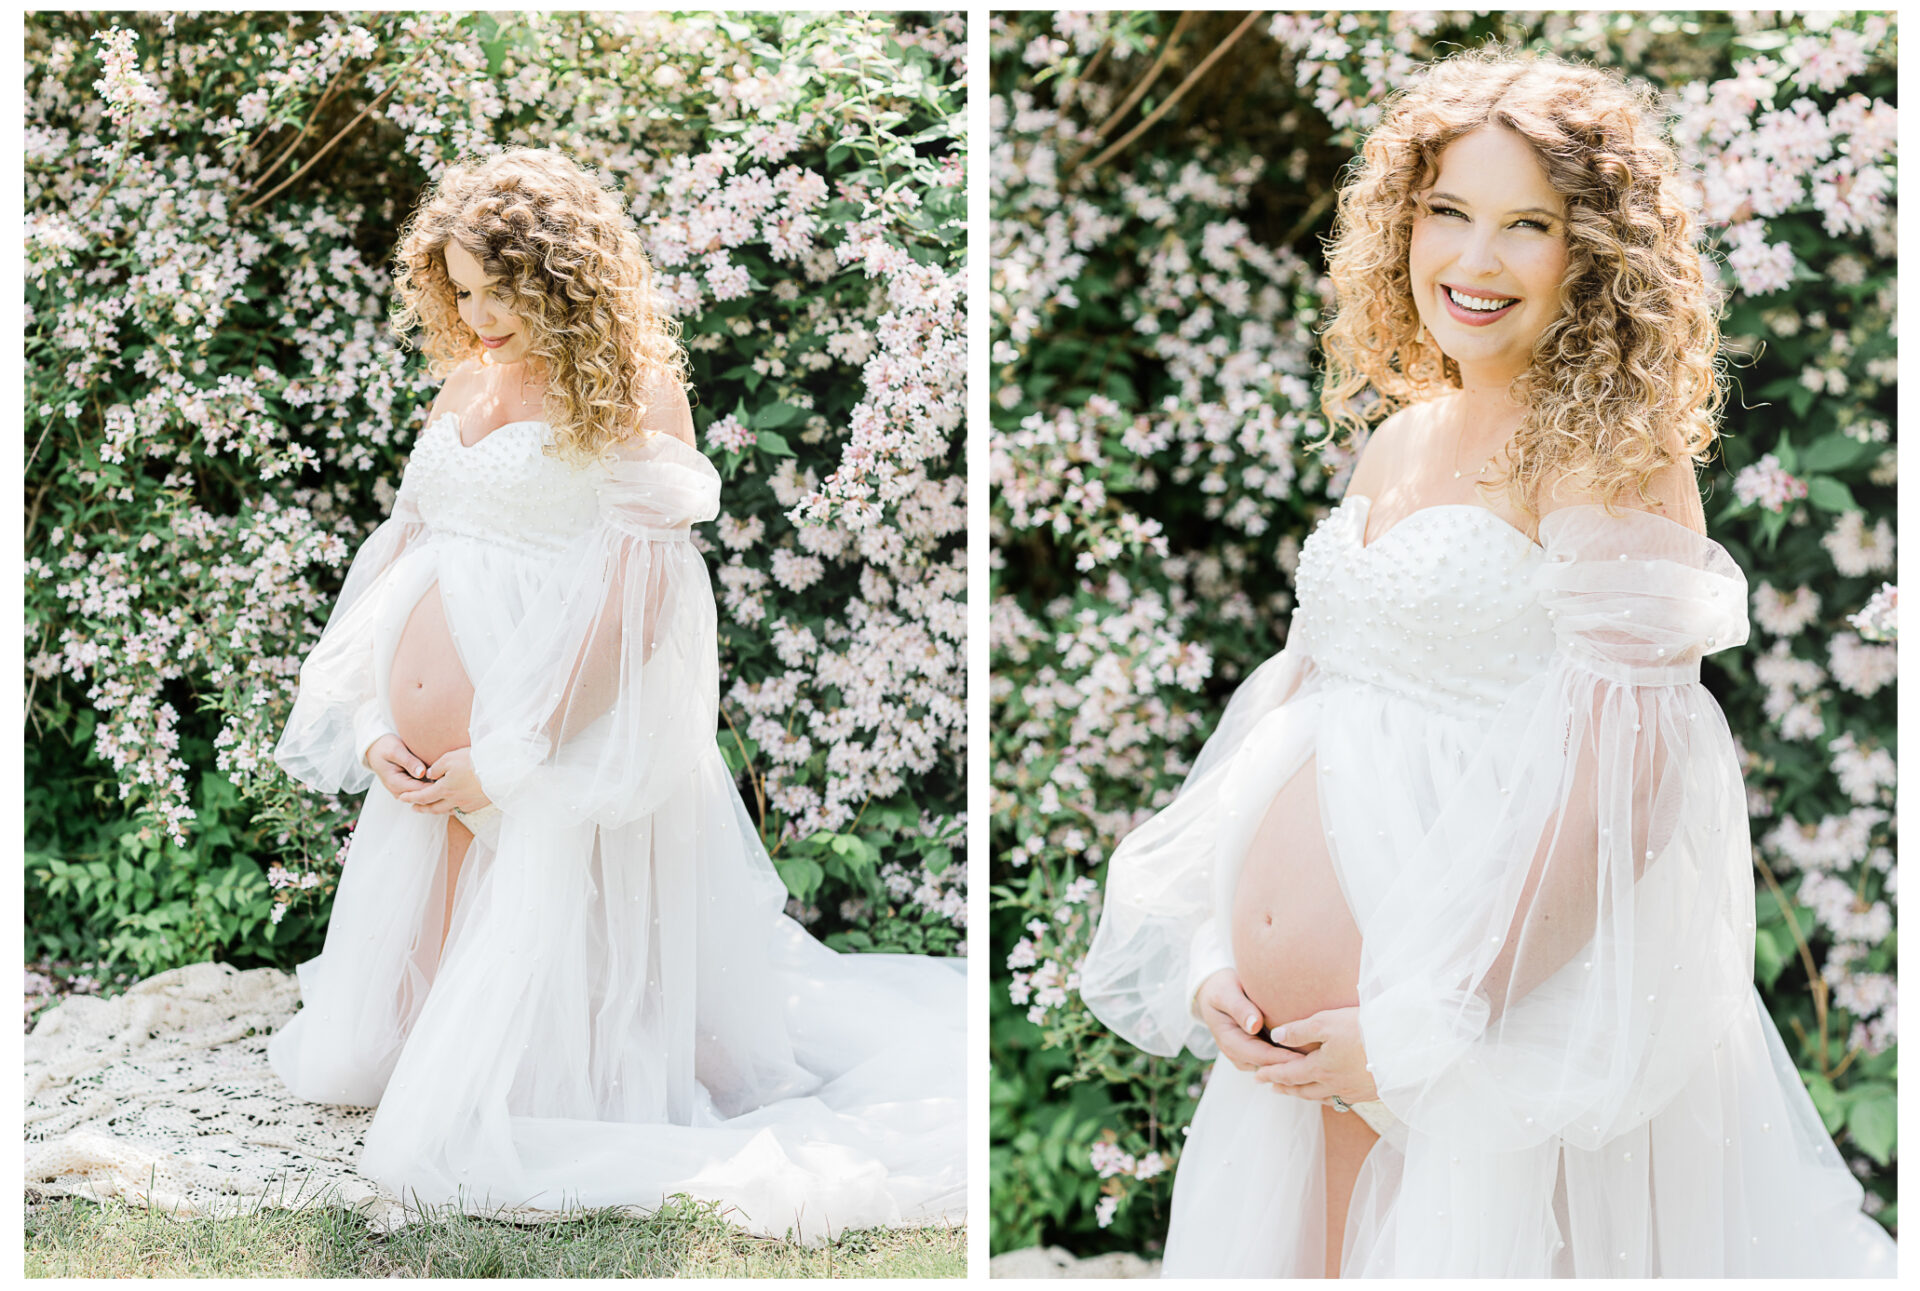 Winter Freire Photography | woman wearing a beautiful white gown during her outdoor summertime maternity session surrounded by blooming flowers